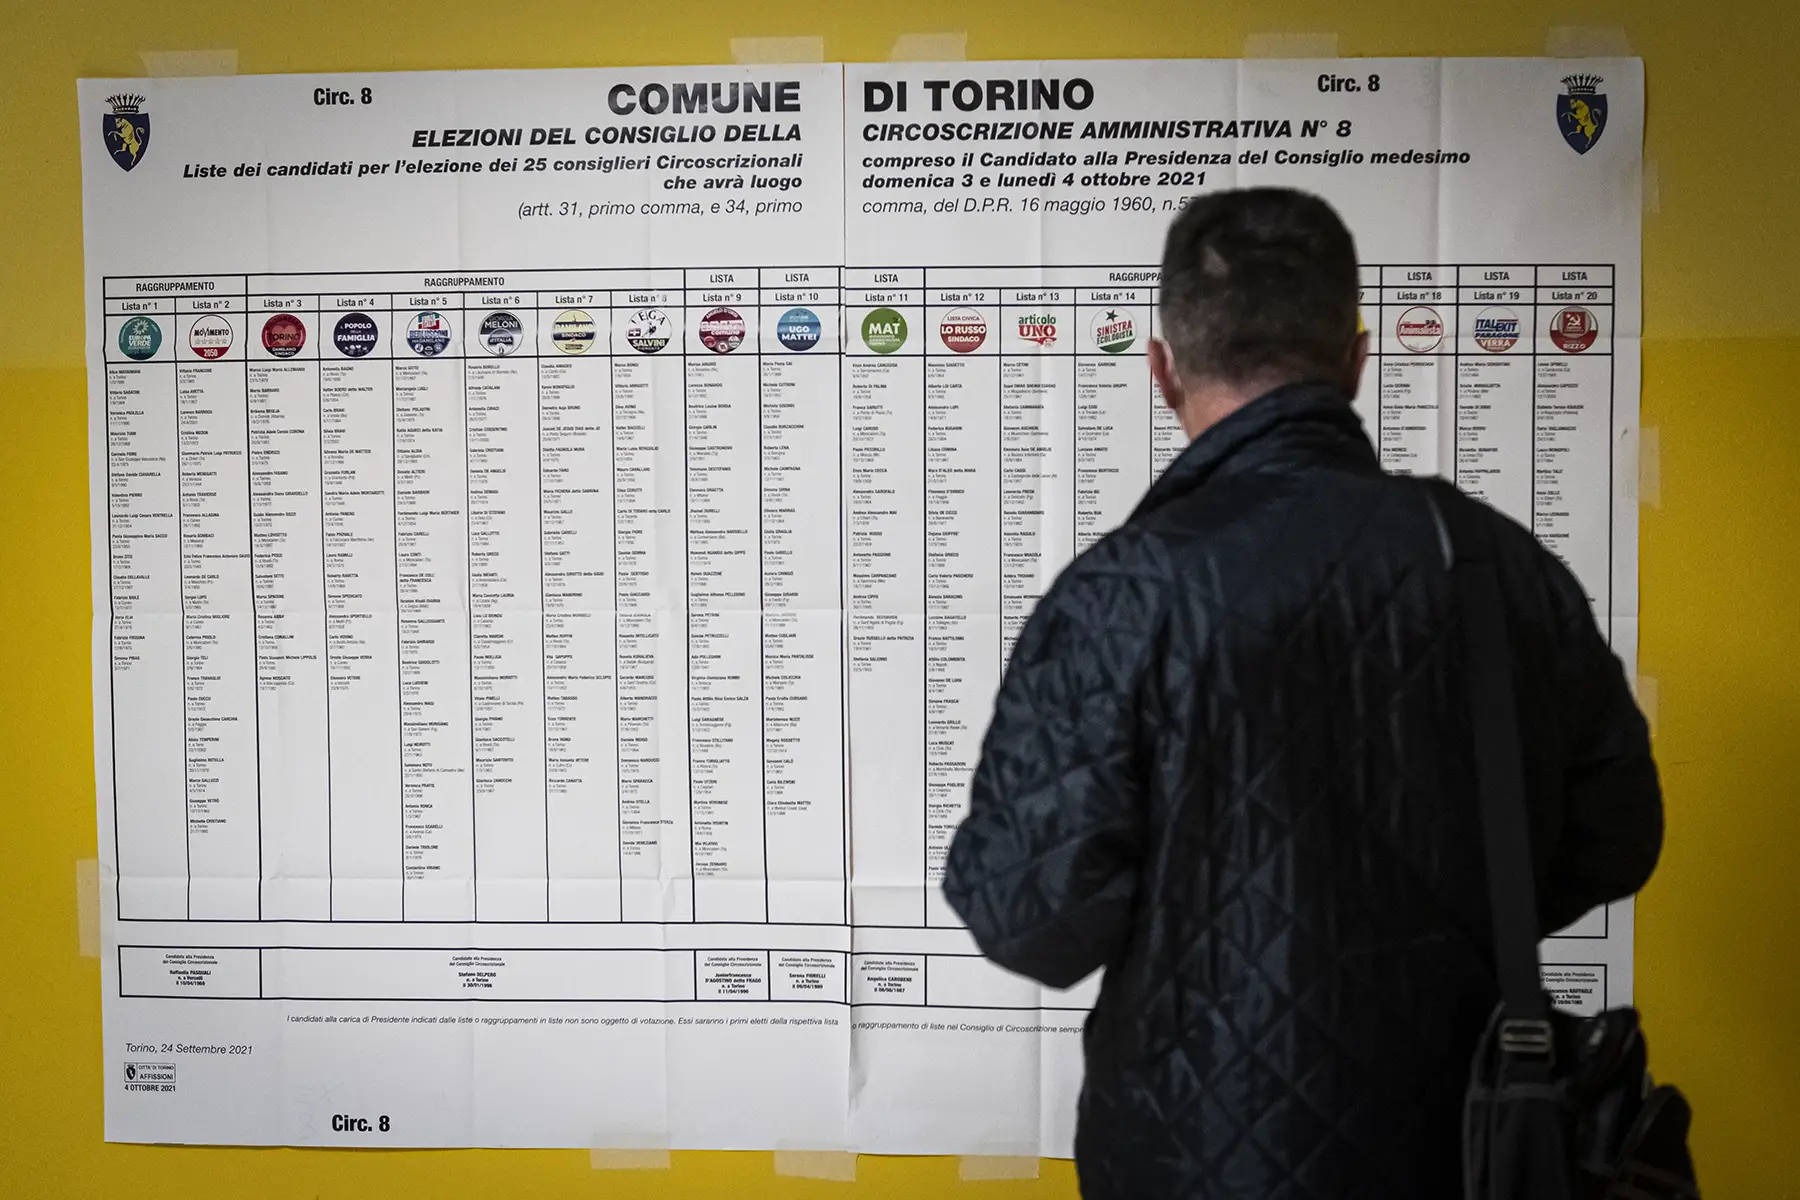 Voter consults a voting board during the 2021 mayoral election in Torino